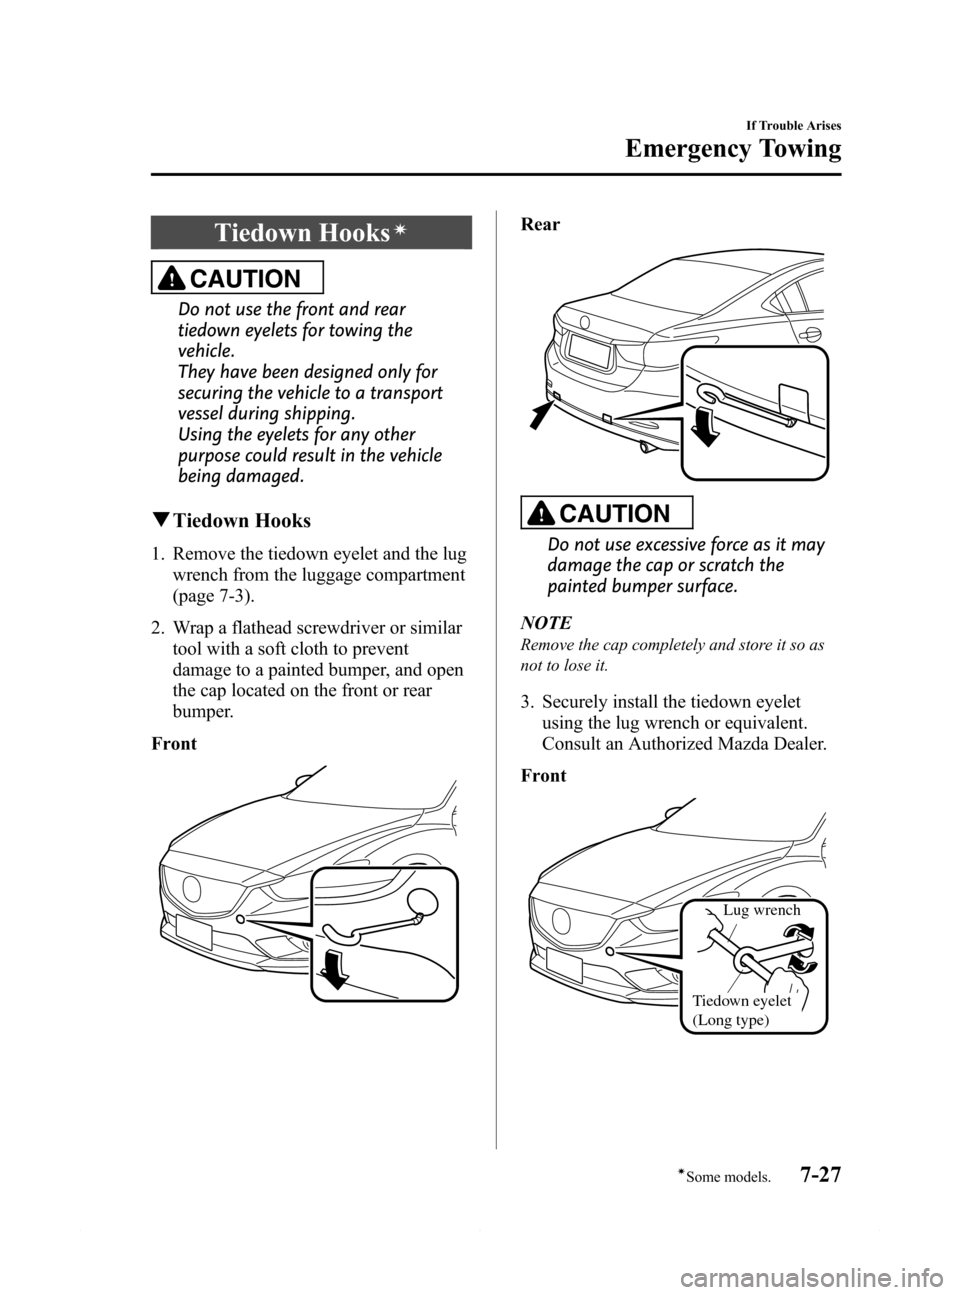 MAZDA MODEL 6 2015  Owners Manual (in English) Black plate (487,1)
Tiedown Hooksí
CAUTION
Do not use the front and rear
tiedown eyelets for towing the
vehicle.
They have been designed only for
securing the vehicle to a transport
vessel during shi